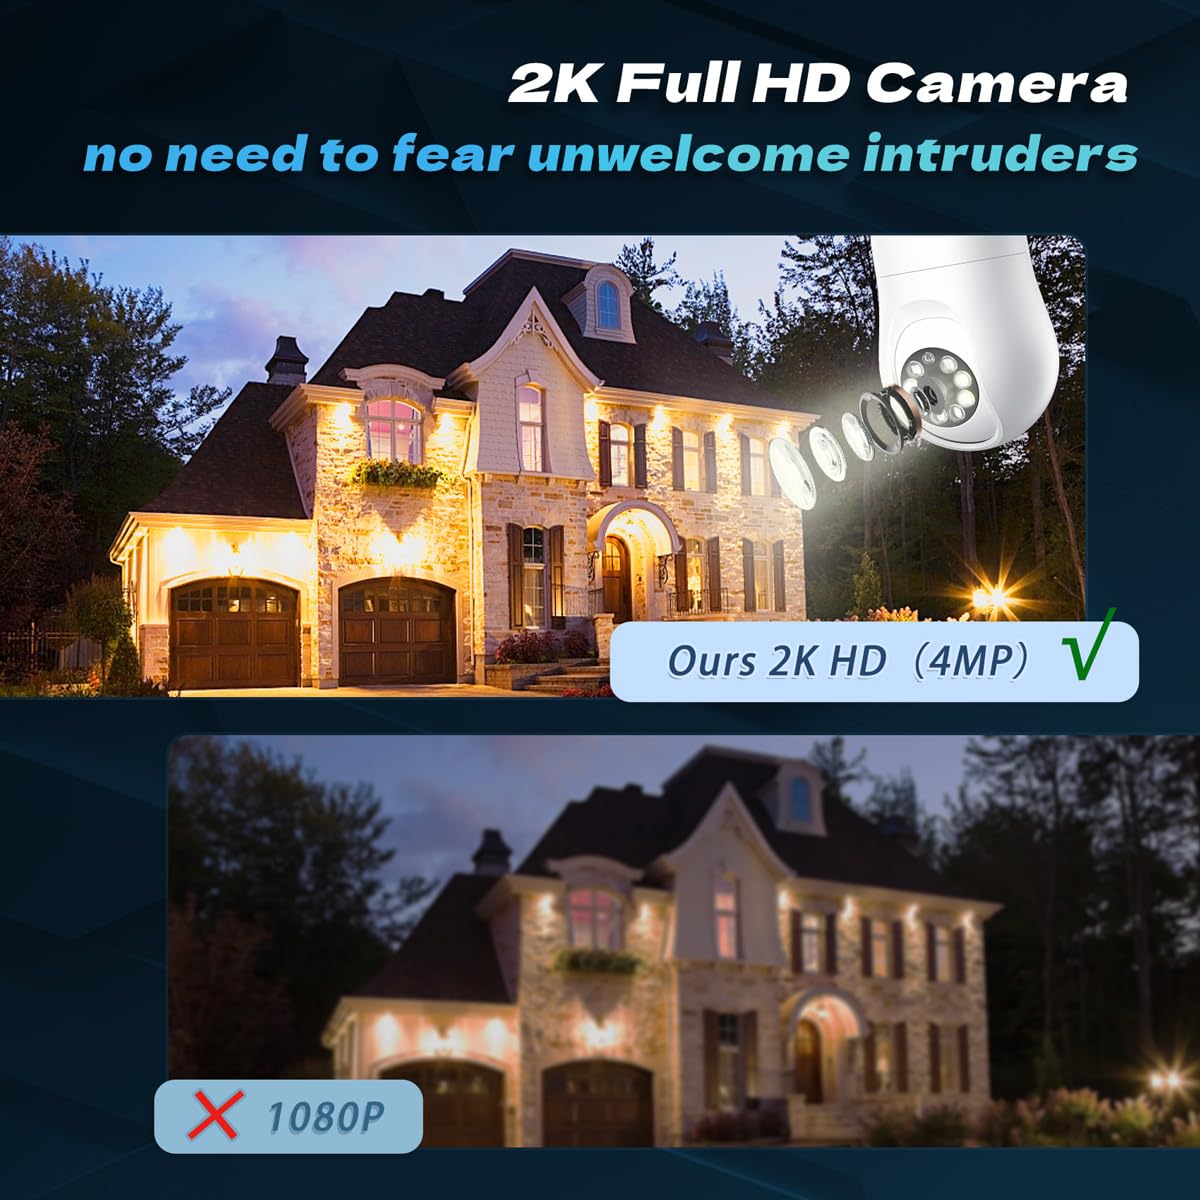 BJR 2K Light Bulb Security Cameram, 4MP 5G & 2.4G WiFi Security Camera Wireless Outdoor Indoor 360 Camera for Home with Color Night Vision Motion&Siren Alert Auto Motion E27 Socket